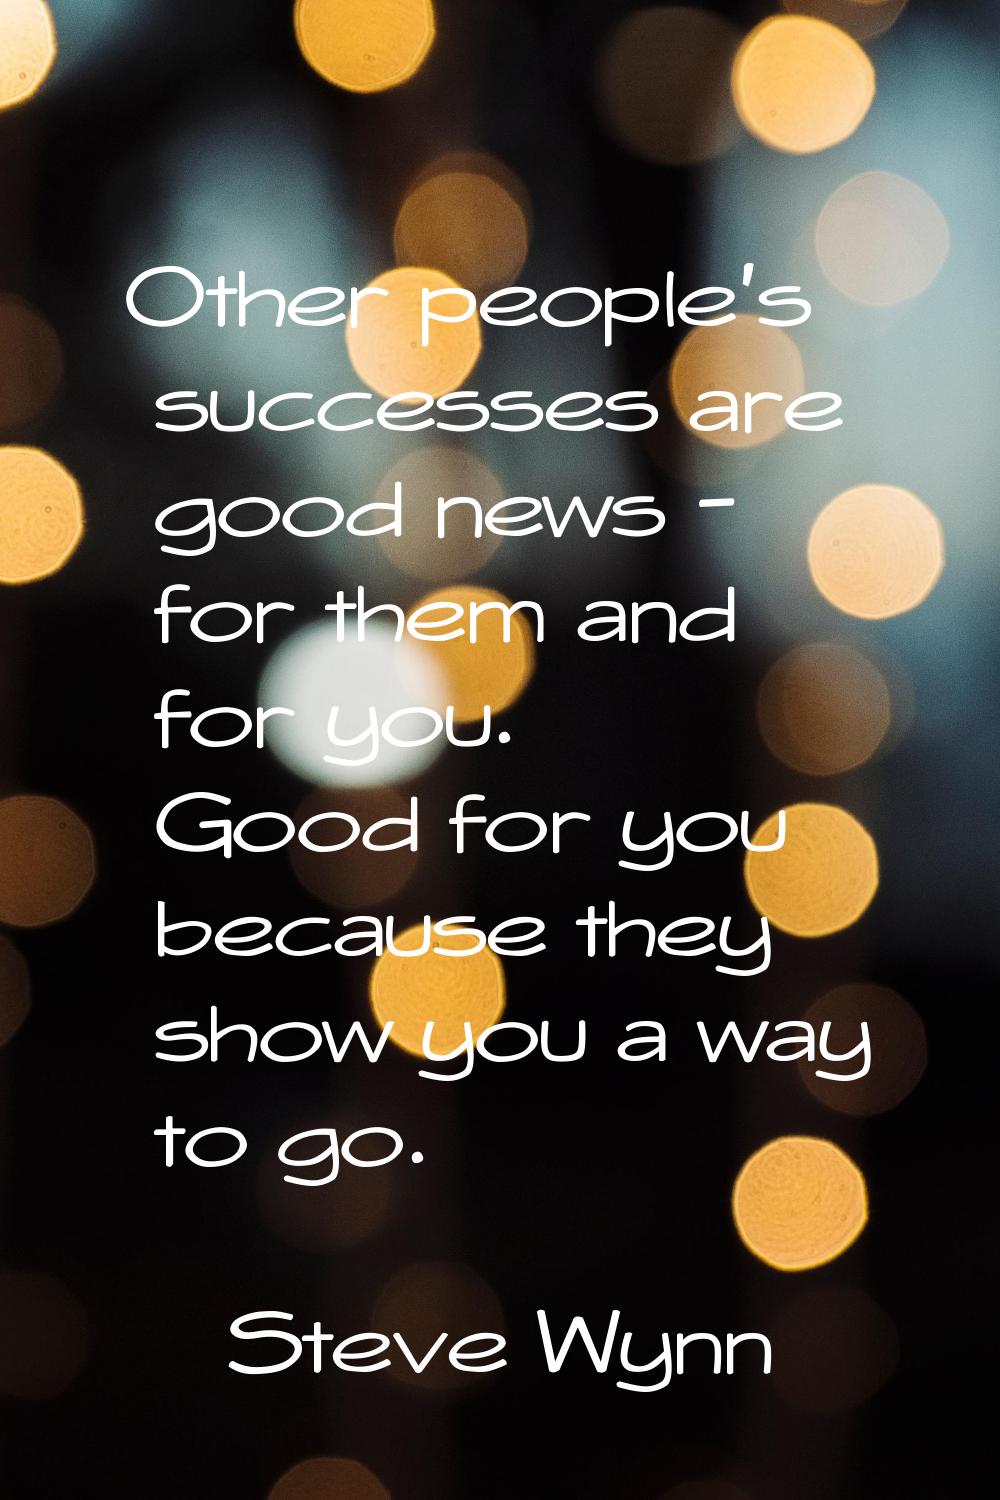 Other people's successes are good news - for them and for you. Good for you because they show you a